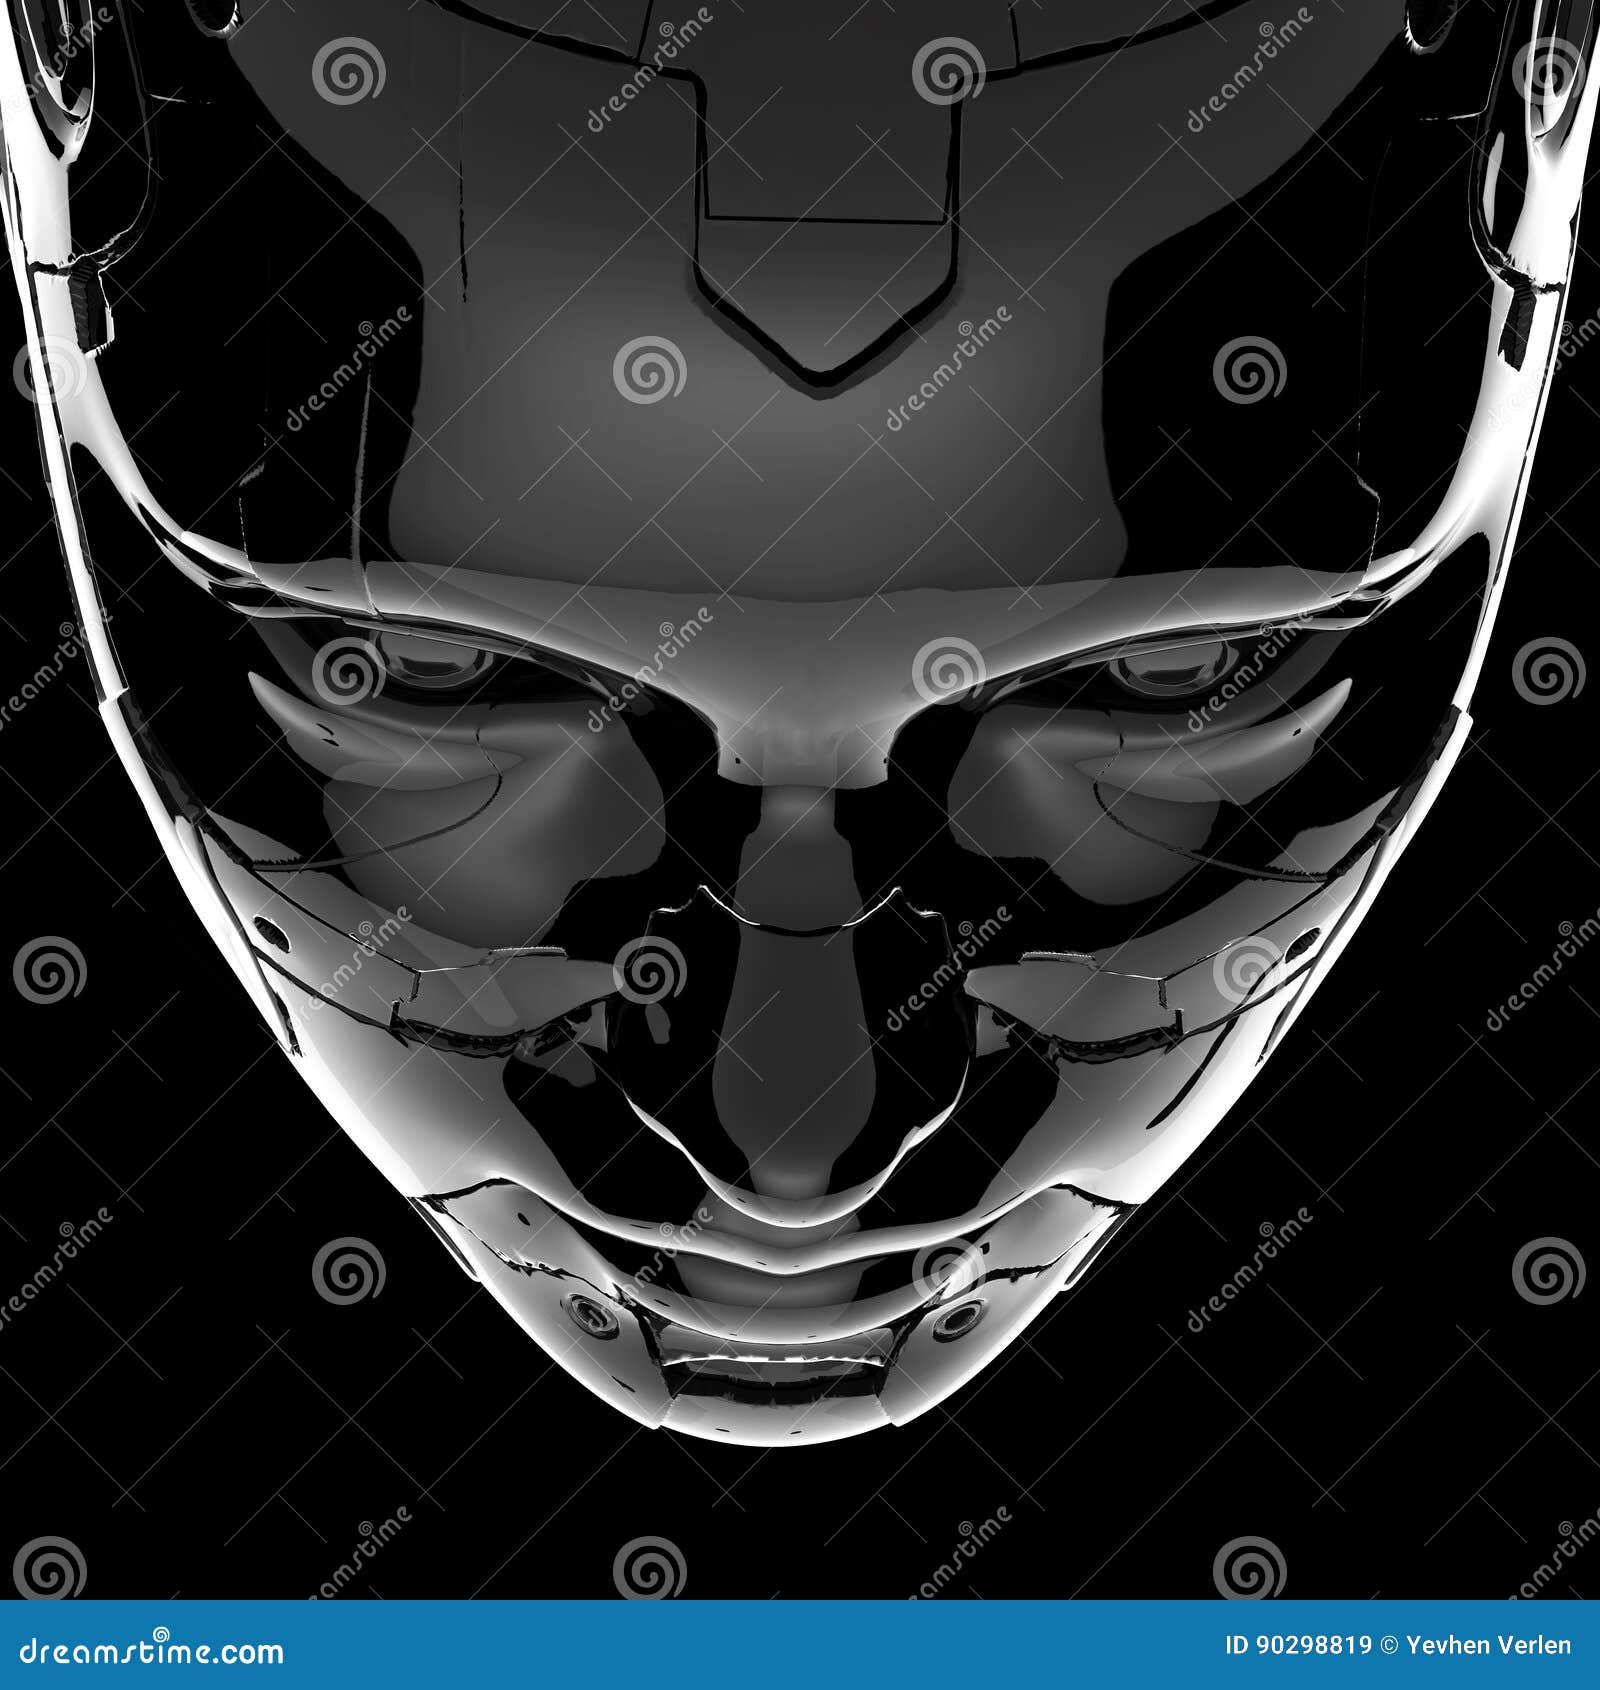 the head of a cyborg on a black background.